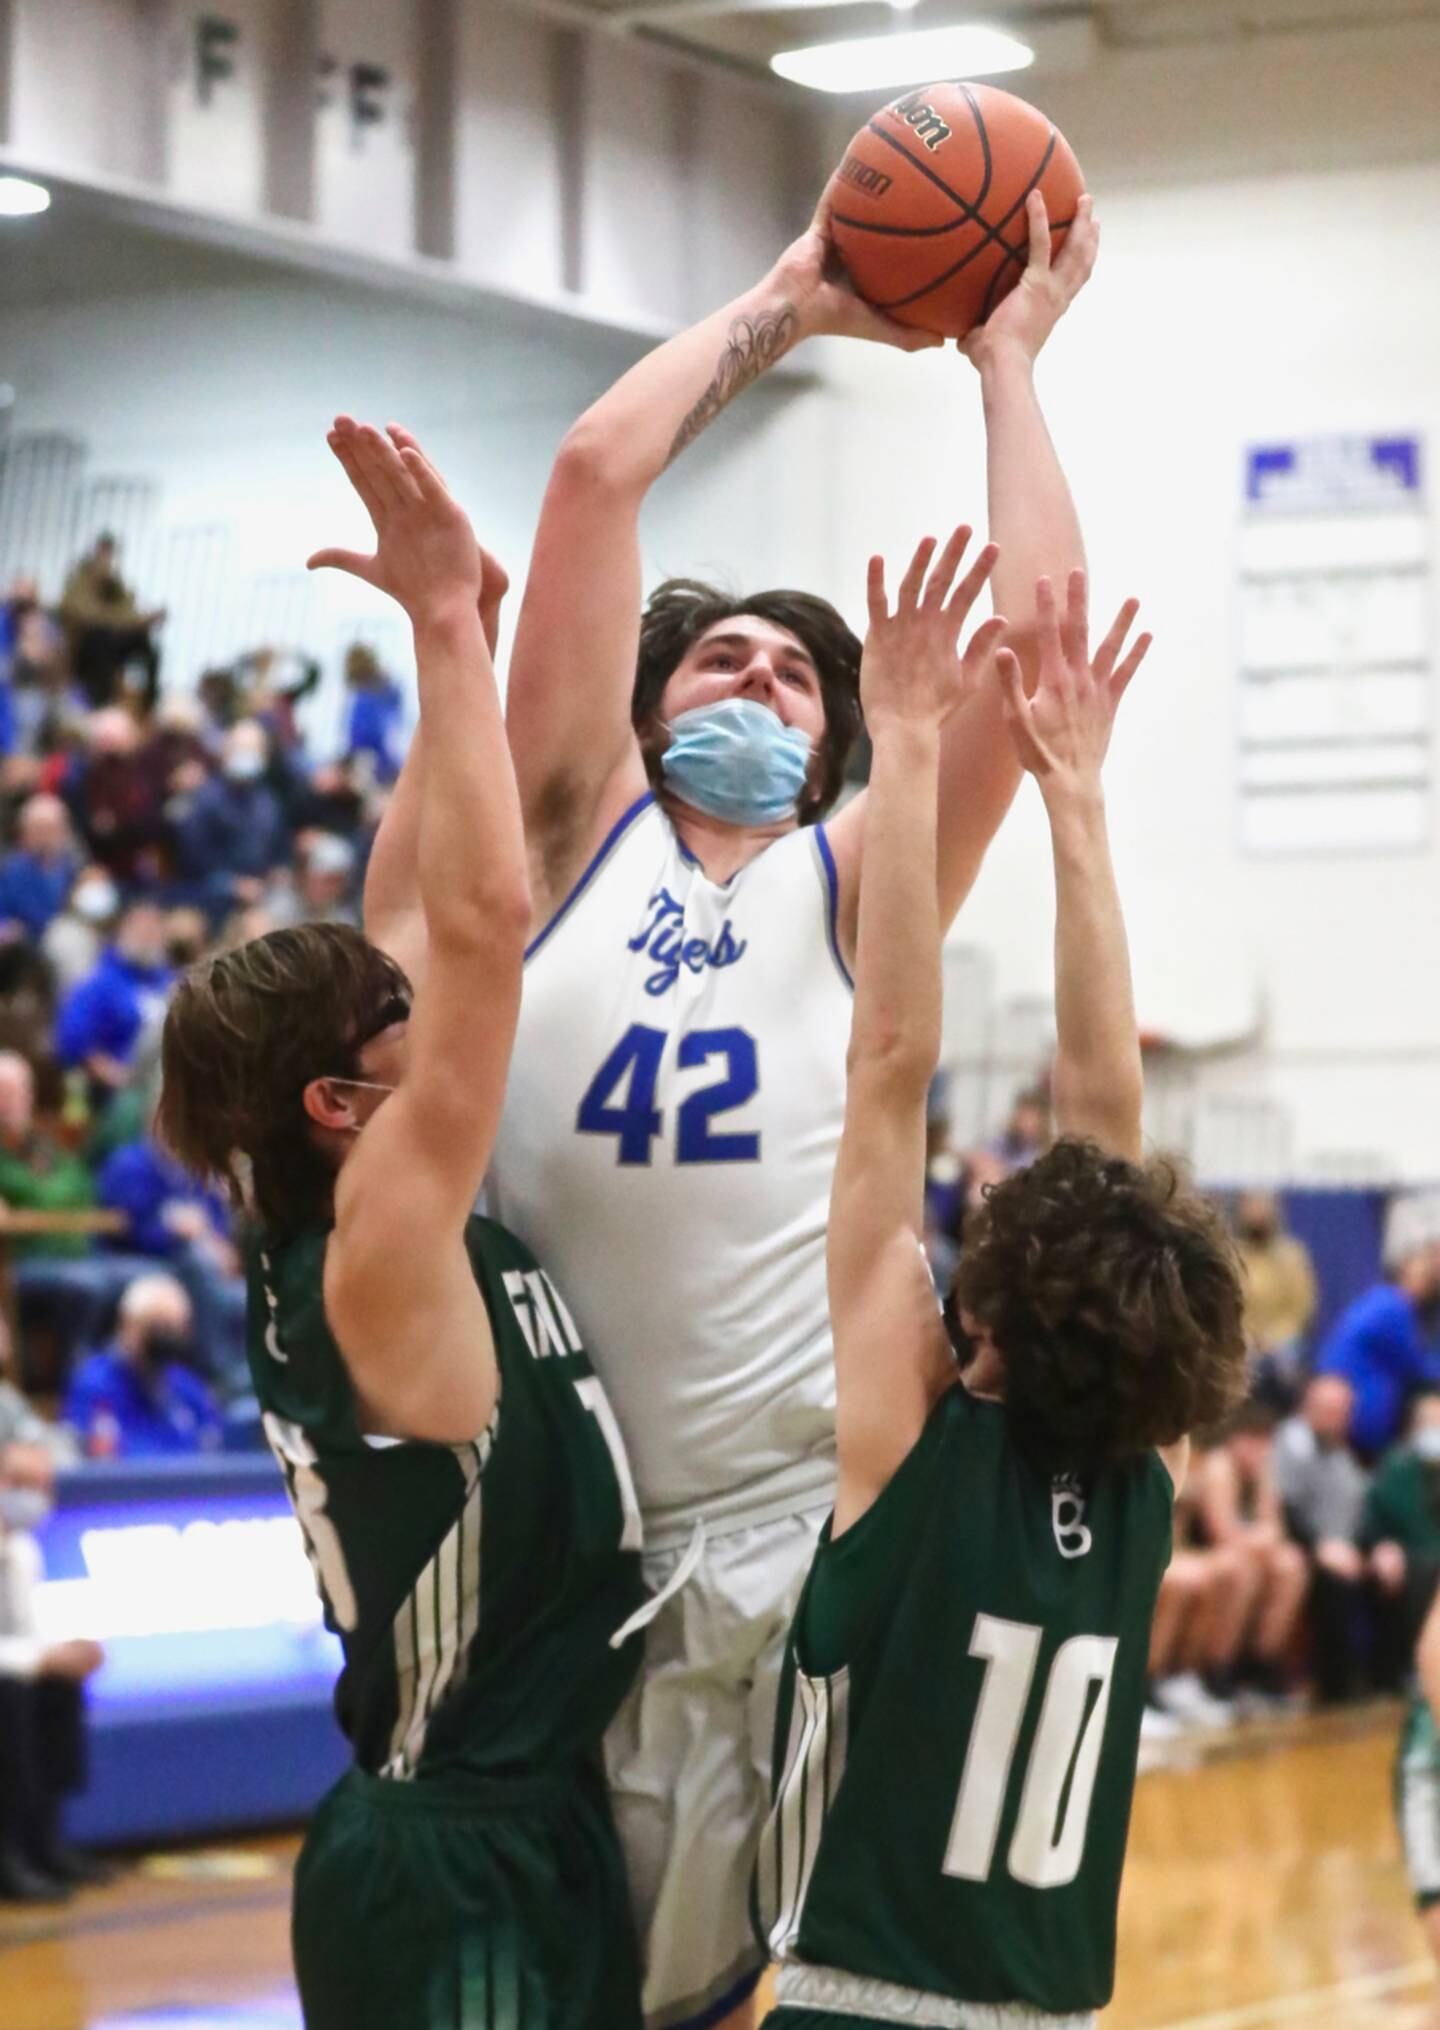 PHS senior Kaden Monroe muscles up for a shot over St. Bede's Landon Jackson (left) and Duncan Lawler Friday night at Prouty Gym.